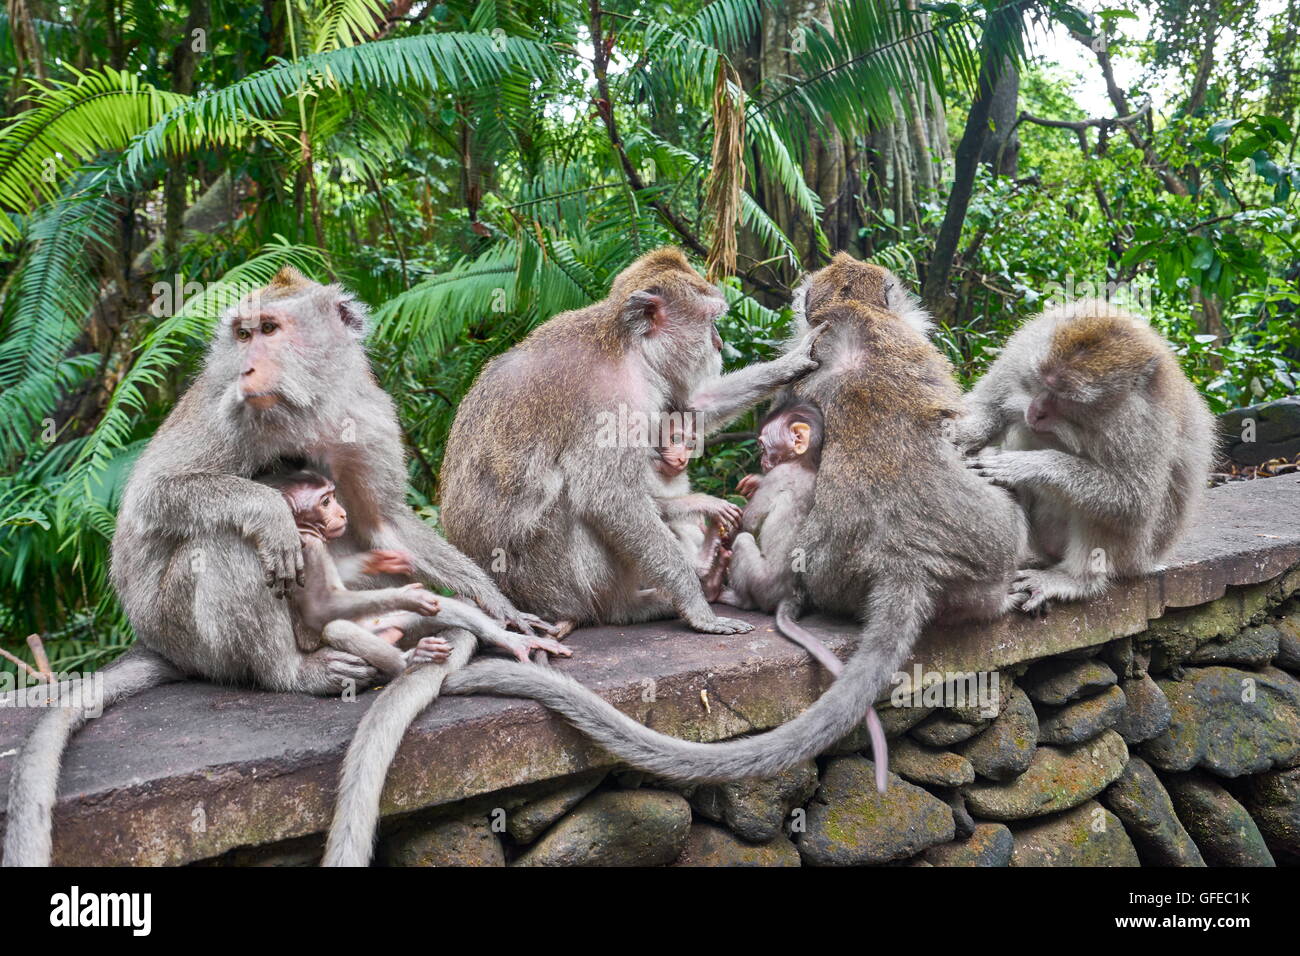 Group of macaques at Secred Monkey Forest Sanctuary, Bali, Indonesia Stock Photo